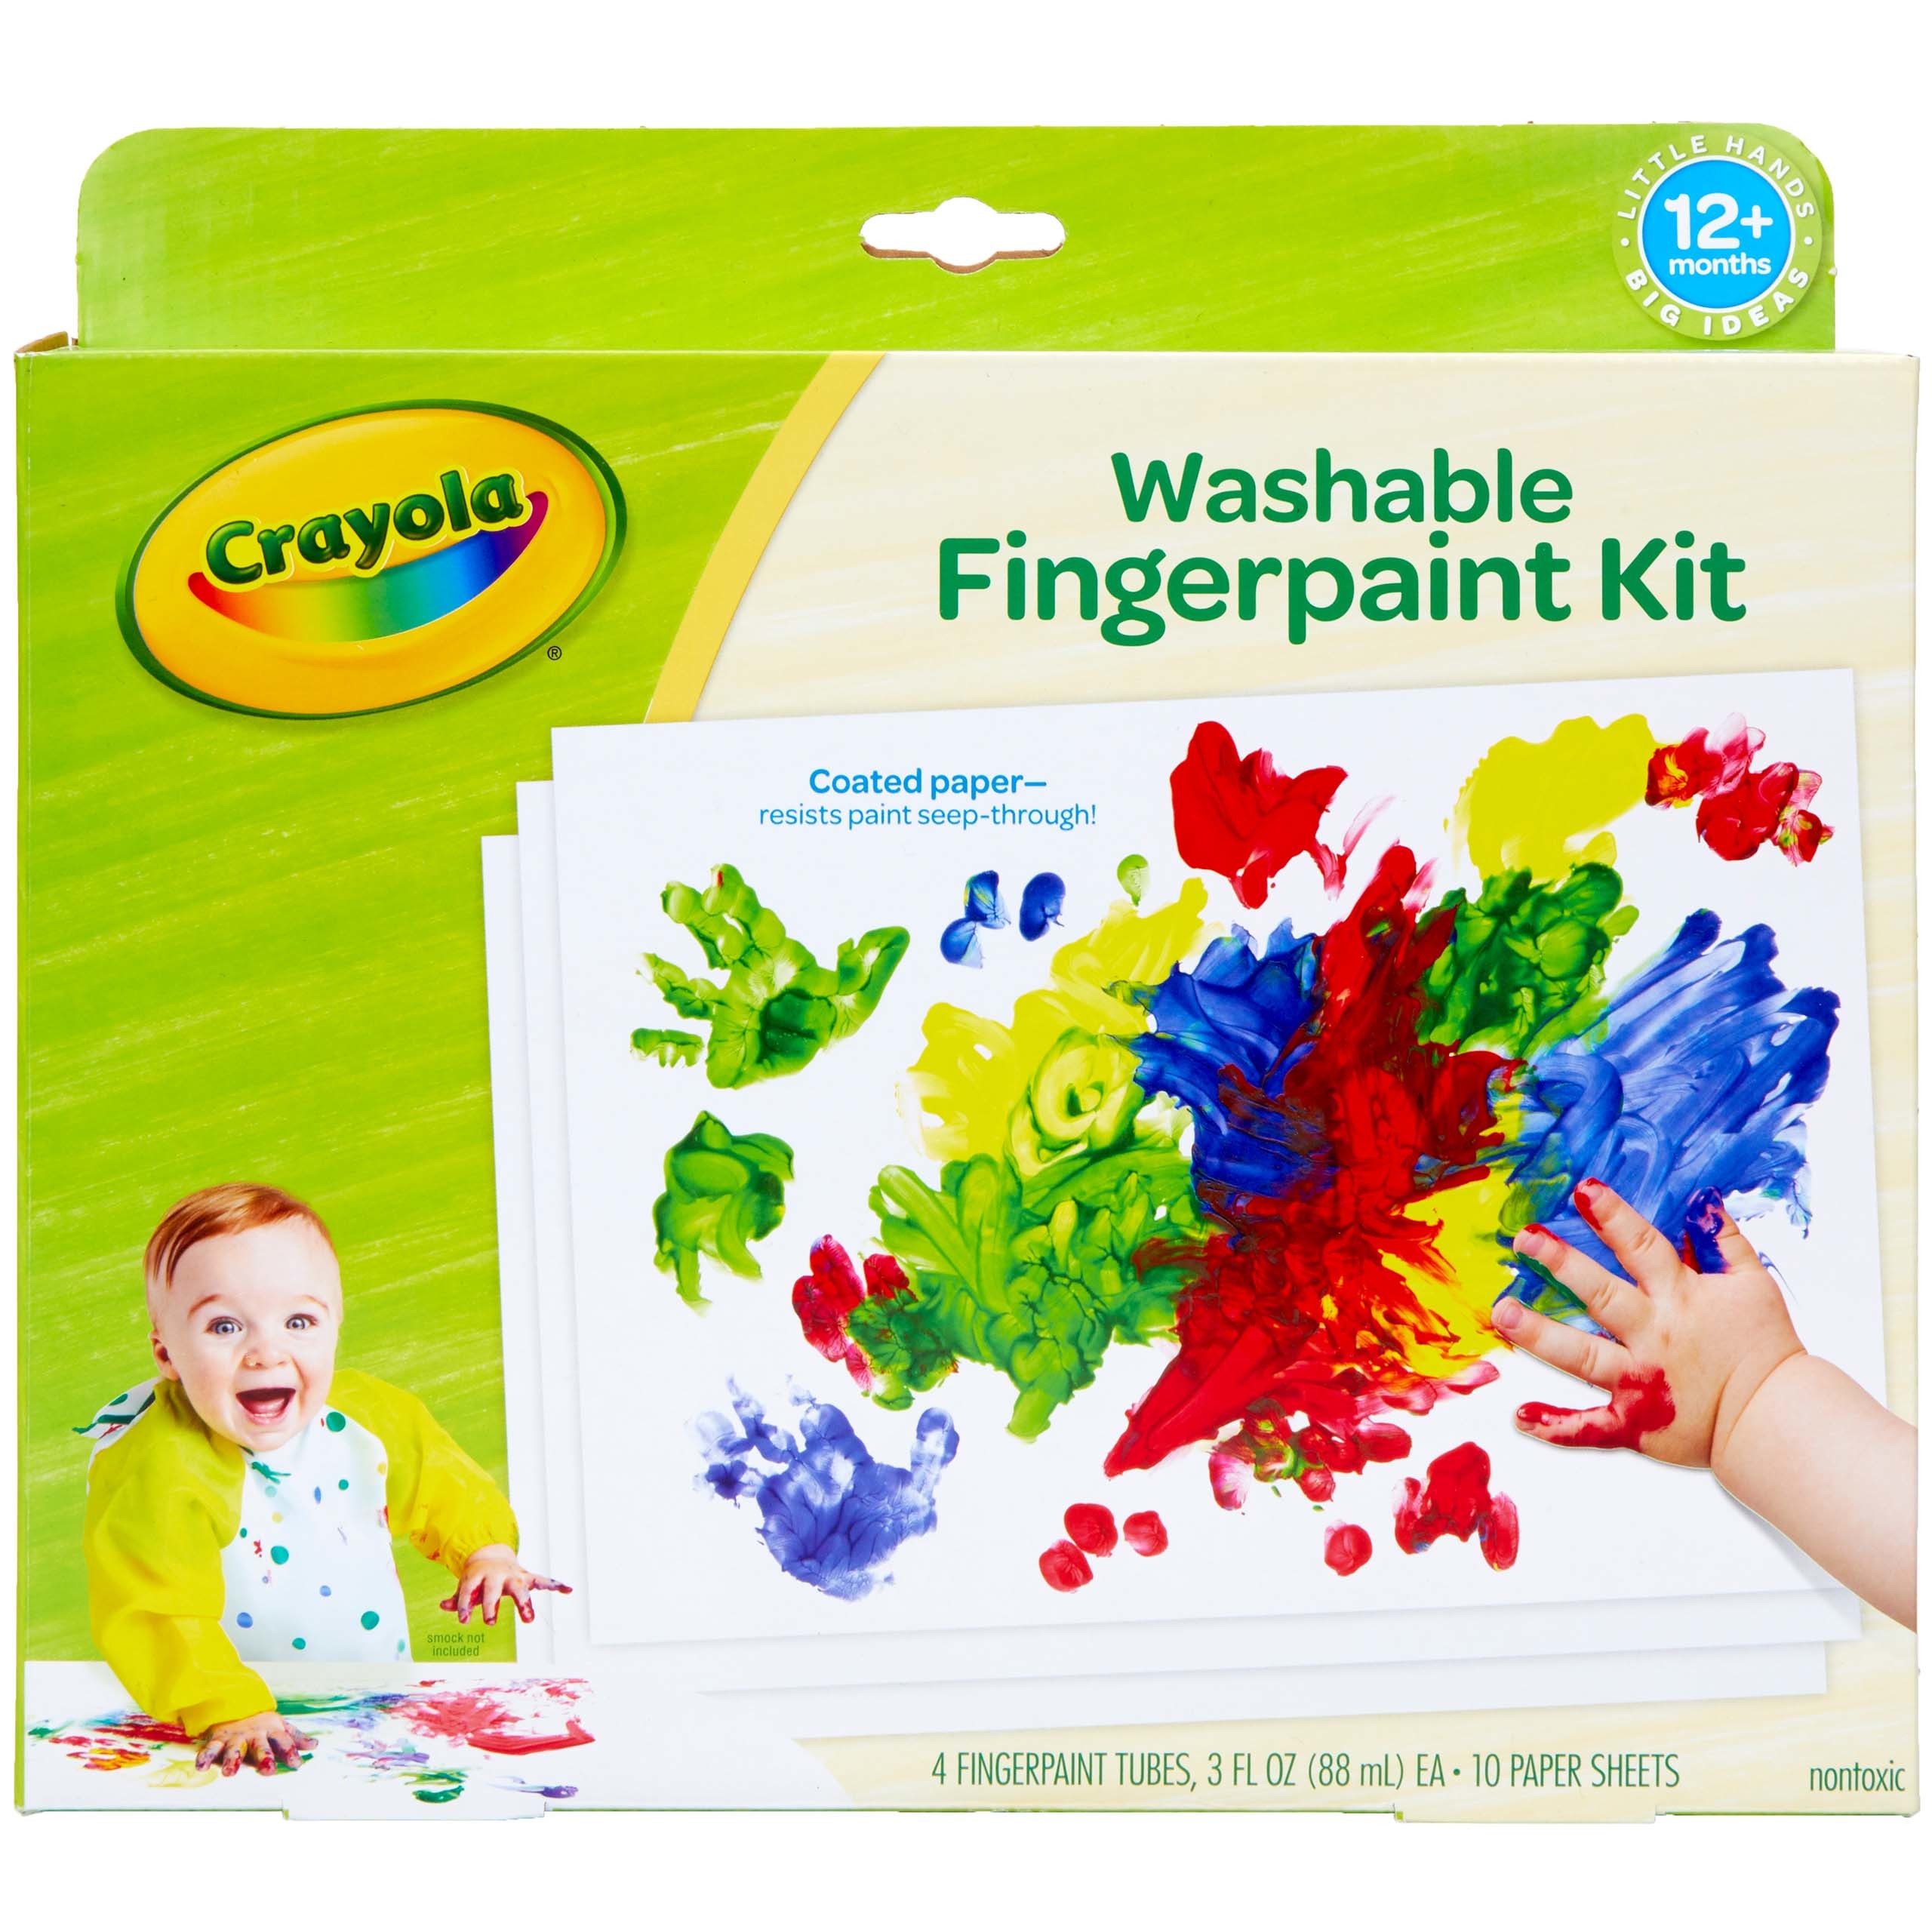 Crayola Washable Finger Paint Set, Toddler Paint Kit, 4 Tubes of Paint, 10 Sheets of Paper, Gift - image 1 of 8